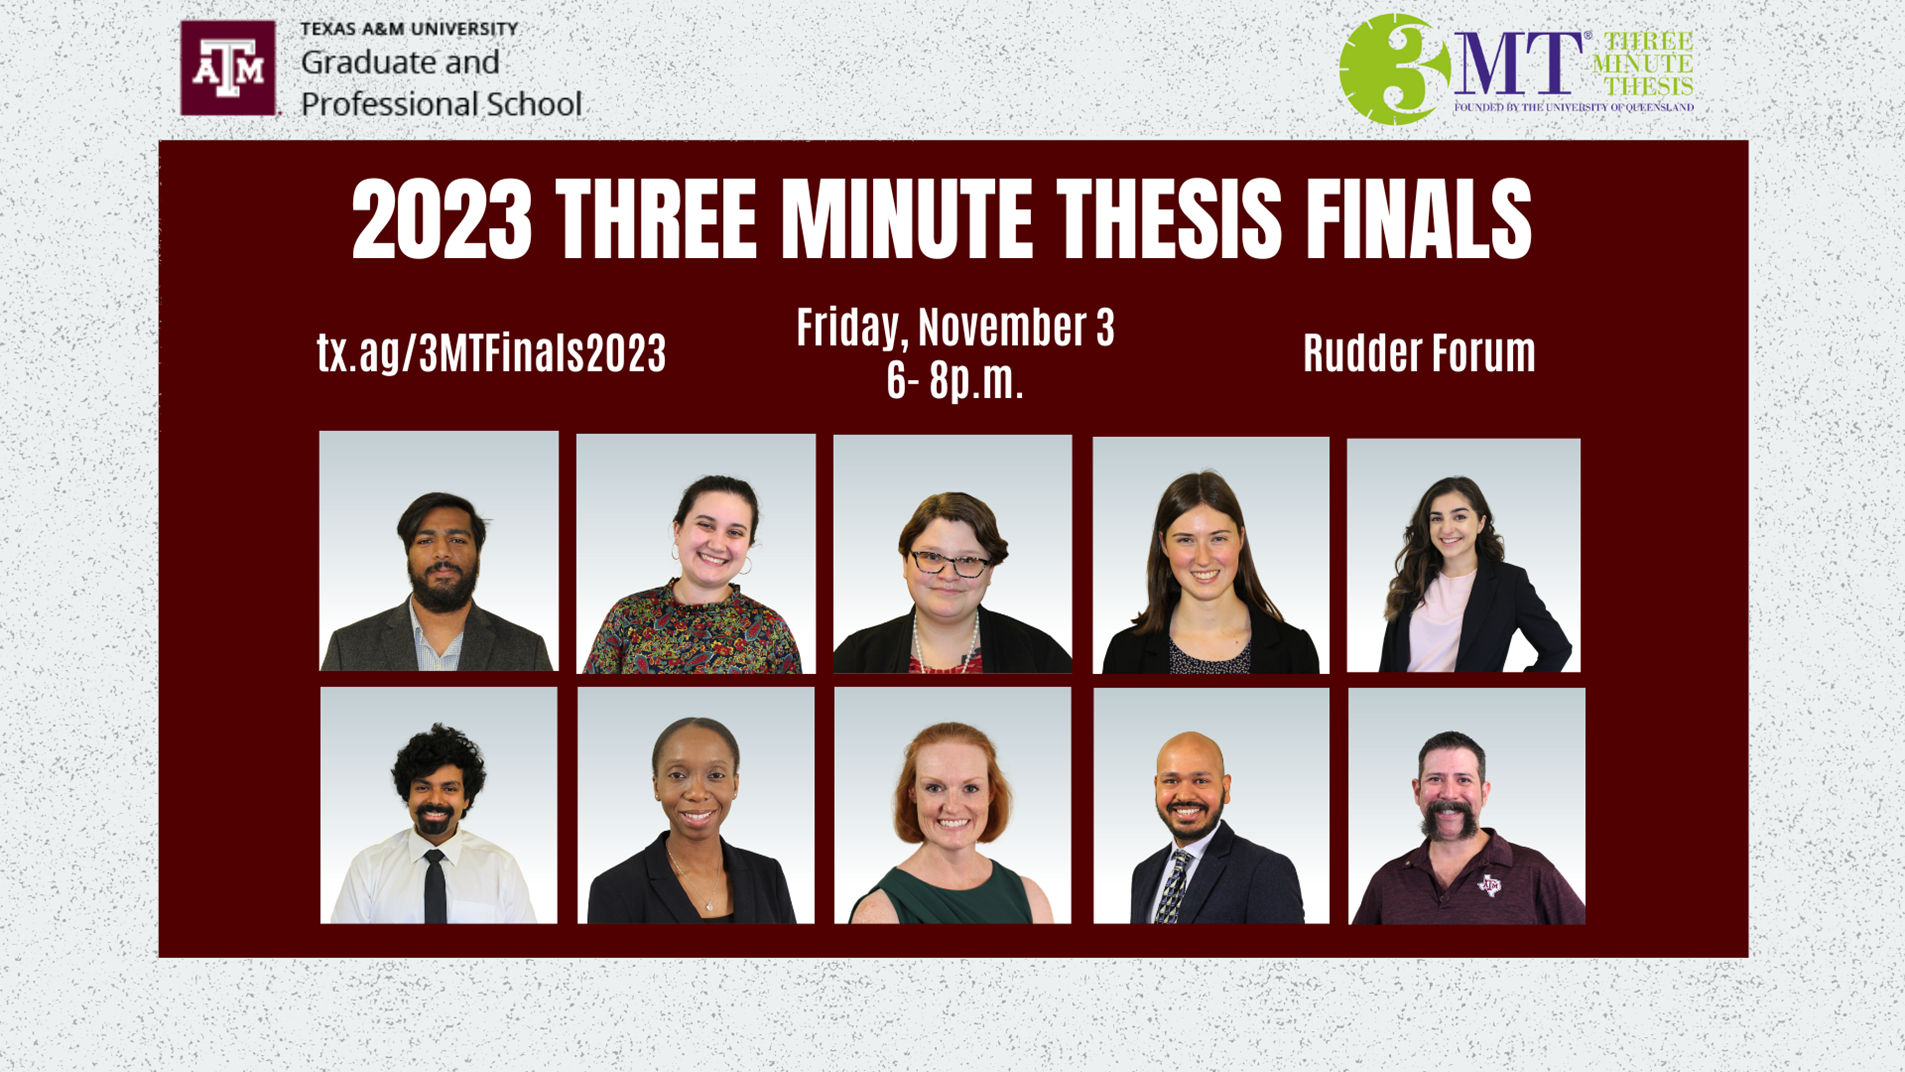 Texas A&M's 11th Annual Three Minute Thesis (3MT®) Finals teaser image